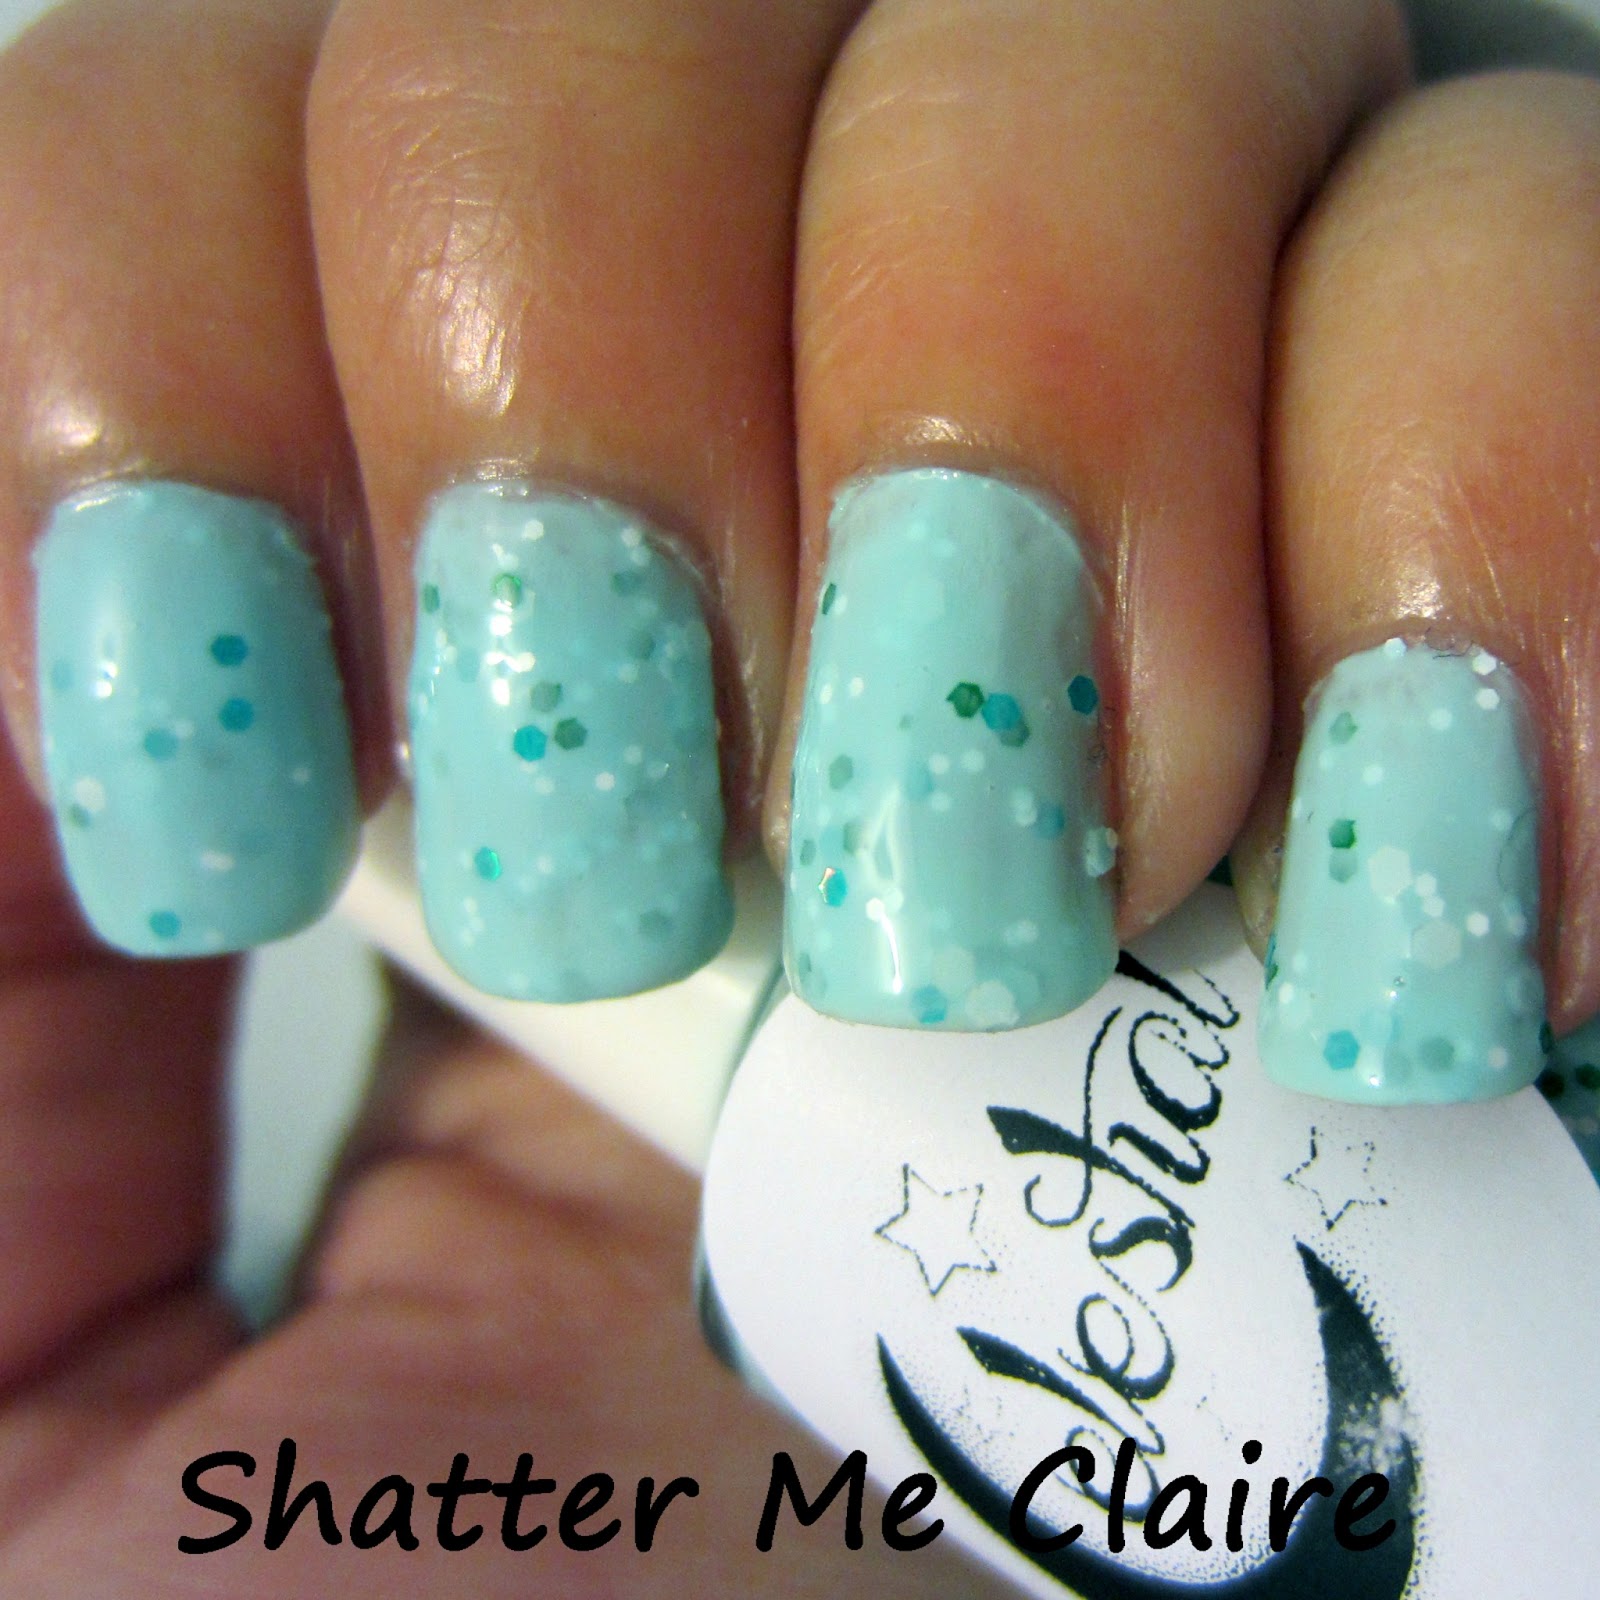 Shatter me Claire: May 2013